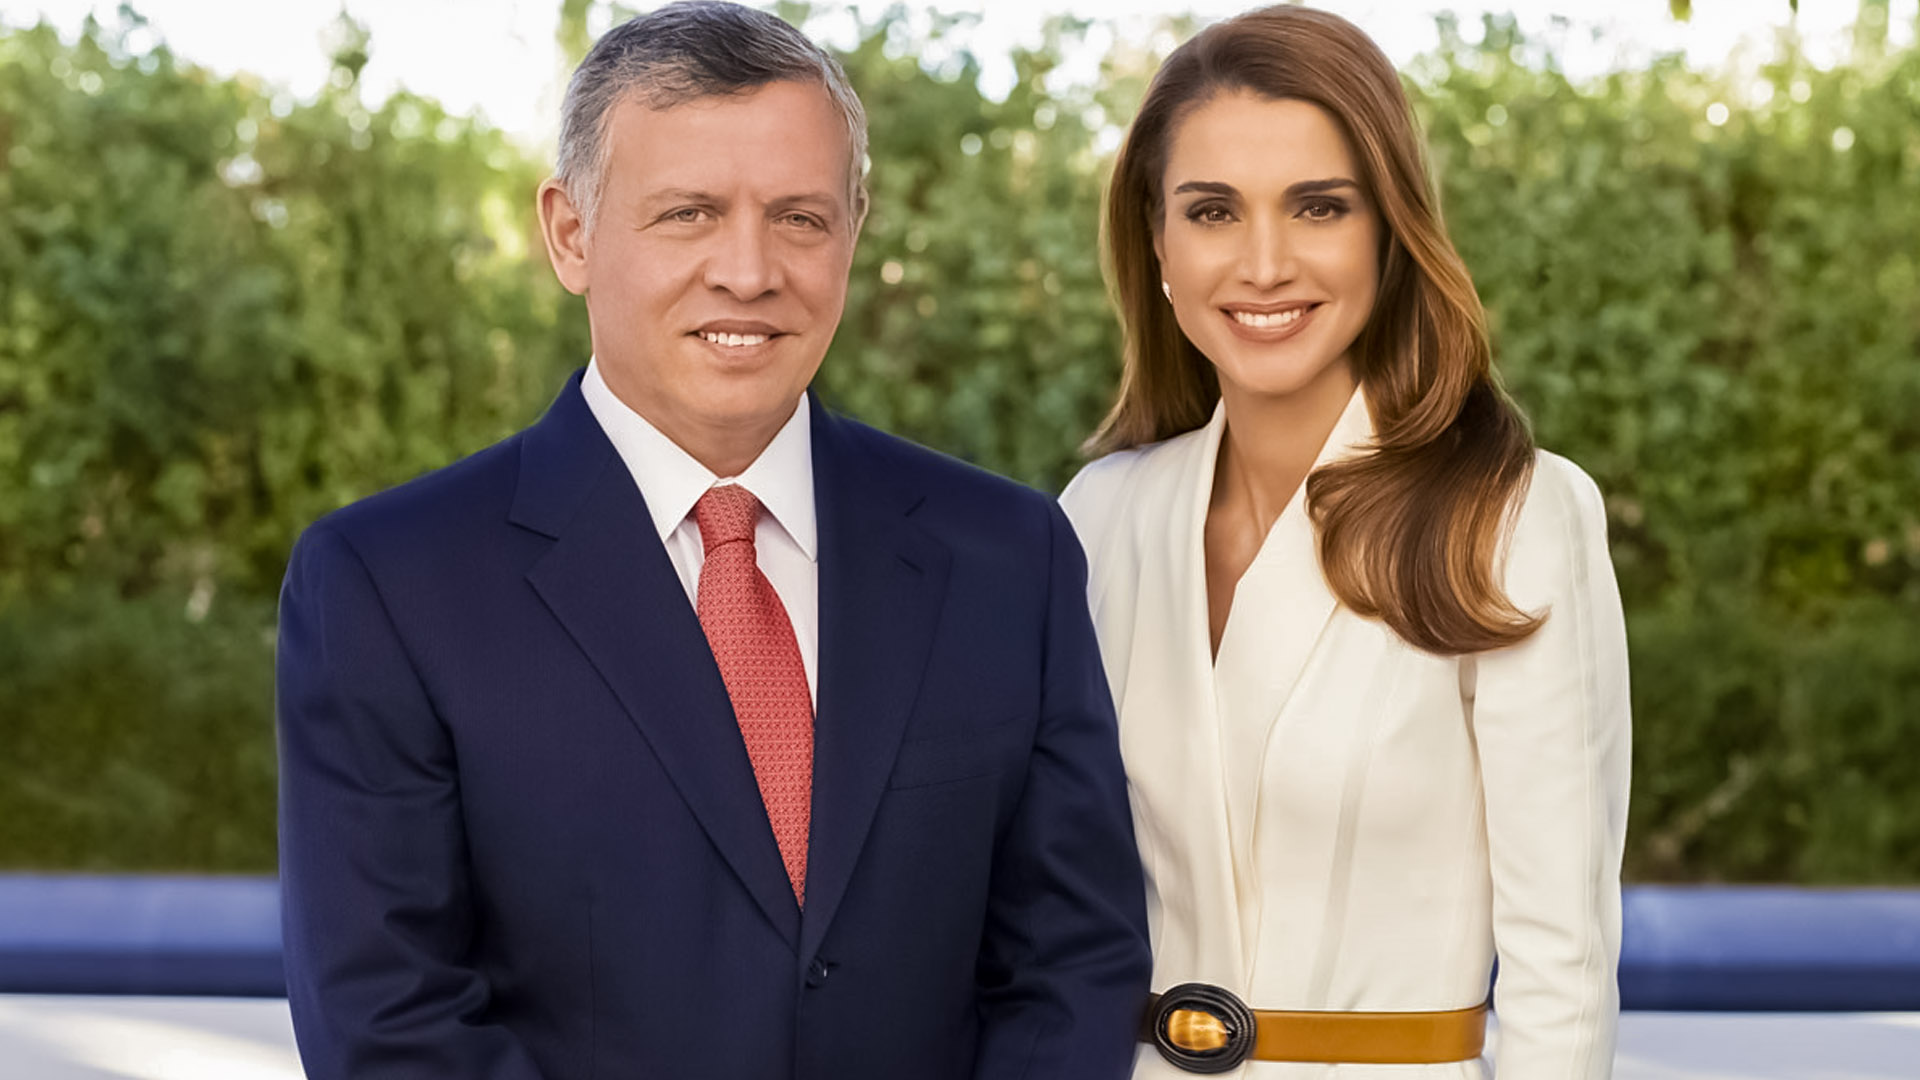 Jordan royals to receive Path to Peace Award in New York